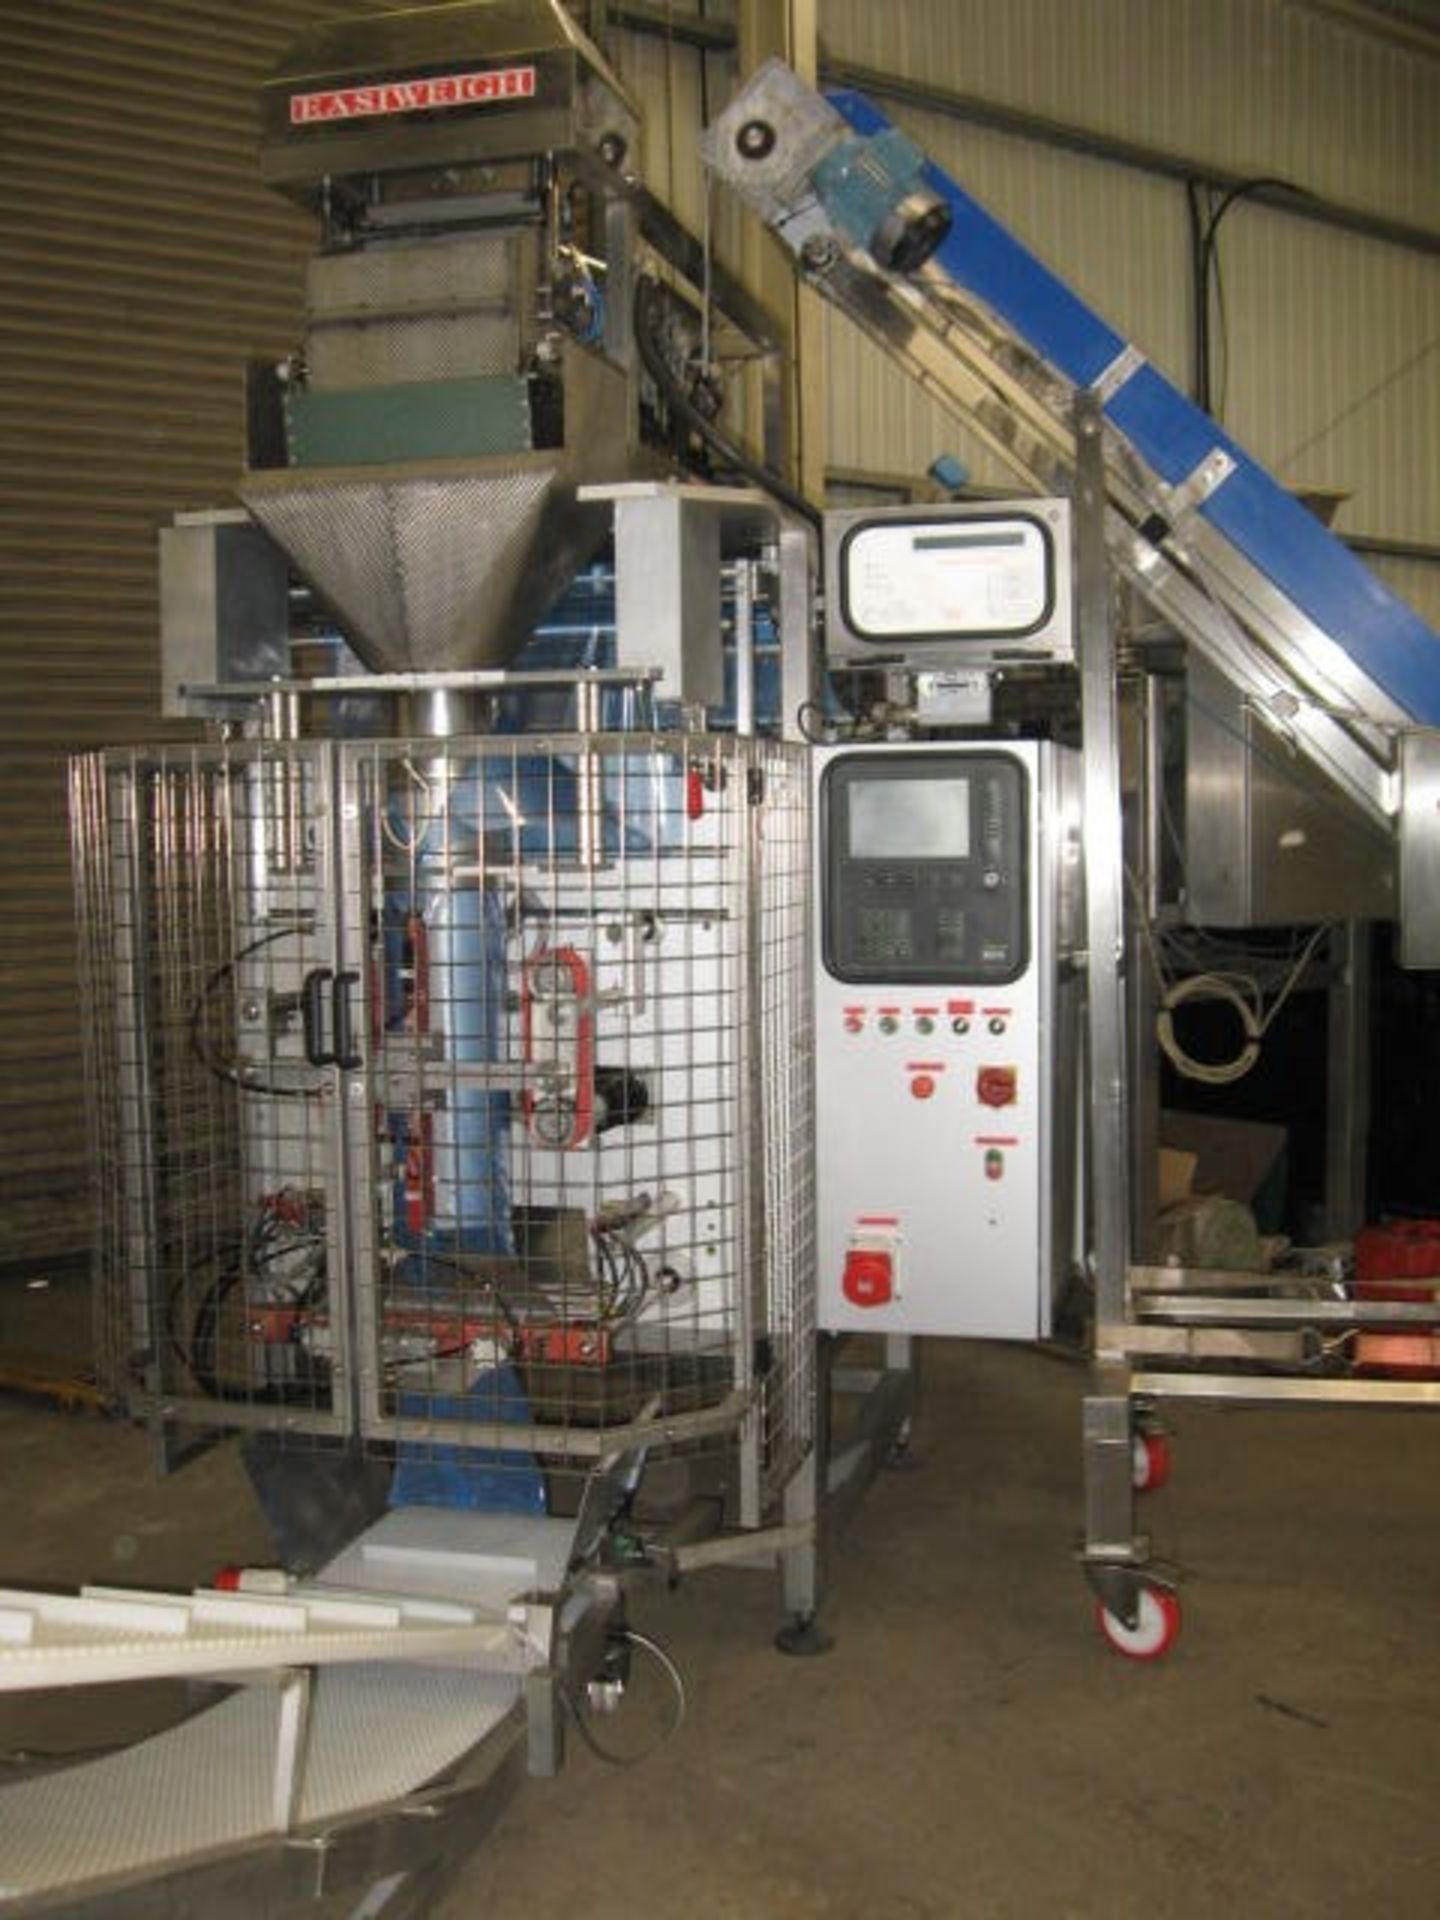 EASIWEIGH LINEAR WEIGHER WITH INNOTECH VFFS BAGGER - Image 2 of 9